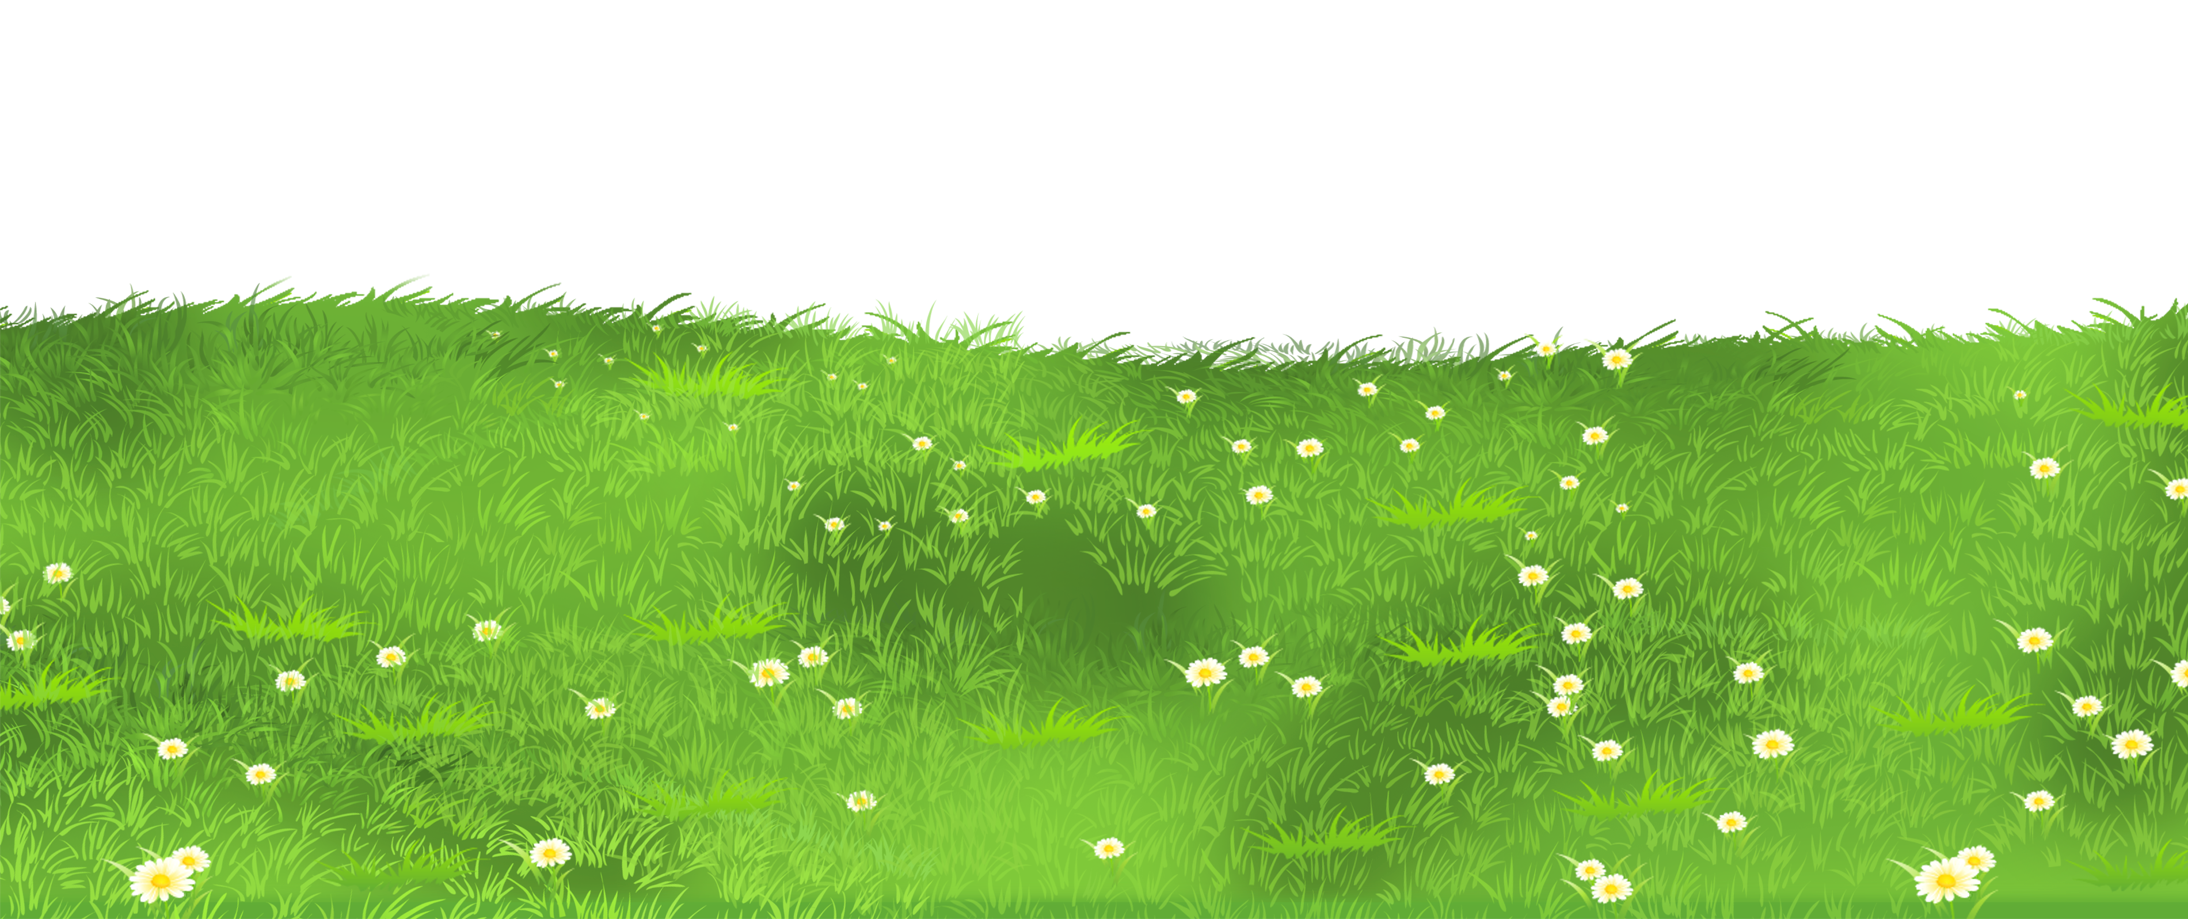 Lawn Grasses Grass With Daisies Ground Clipart